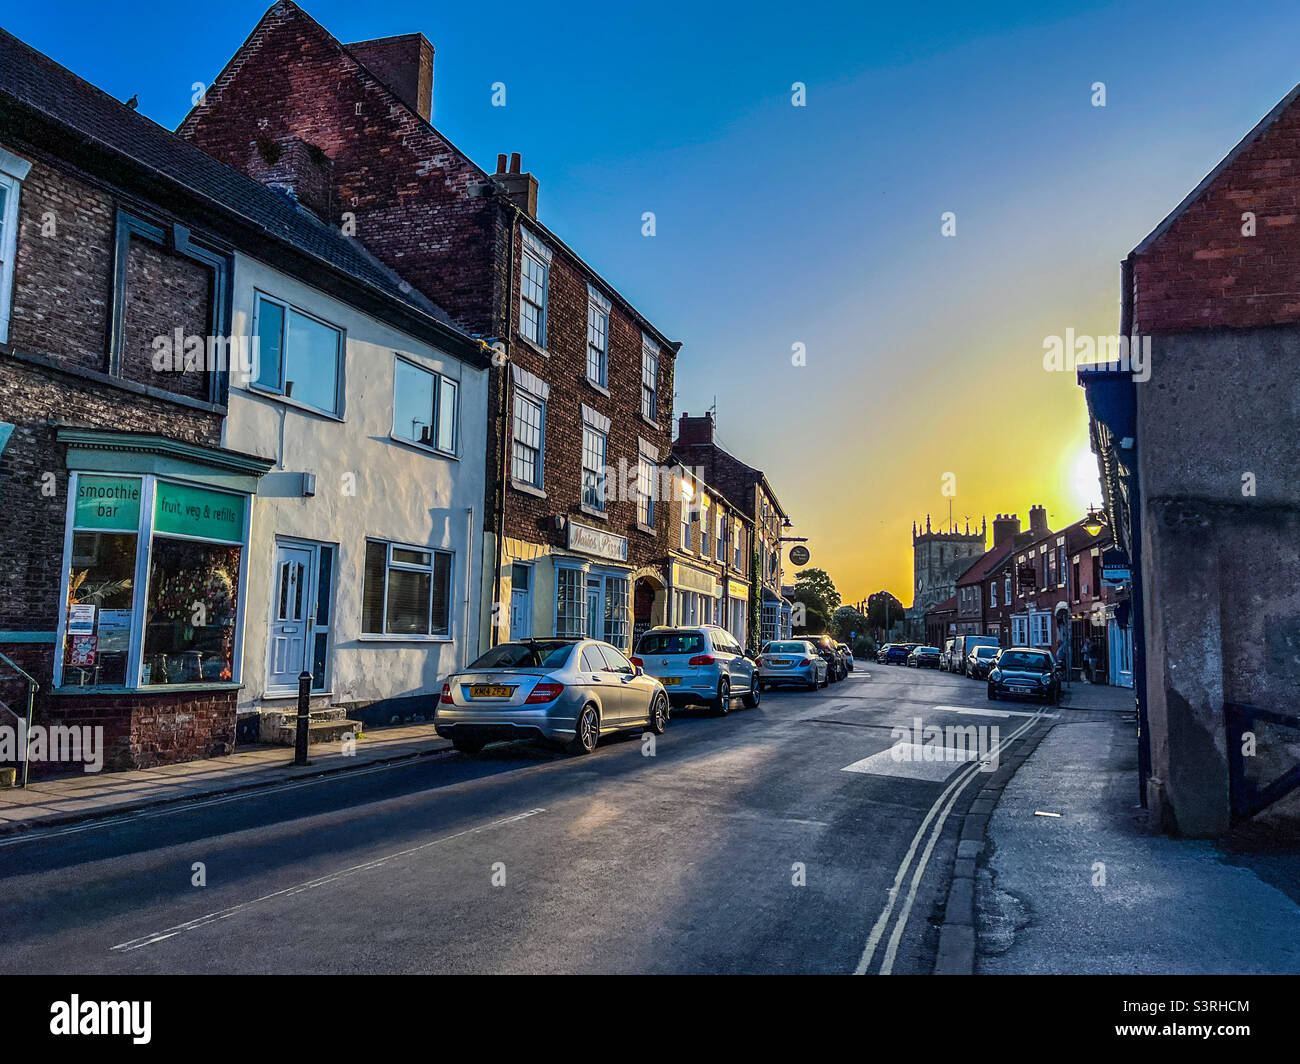 View down Market Place in Snaith village during sunset Stock Photo